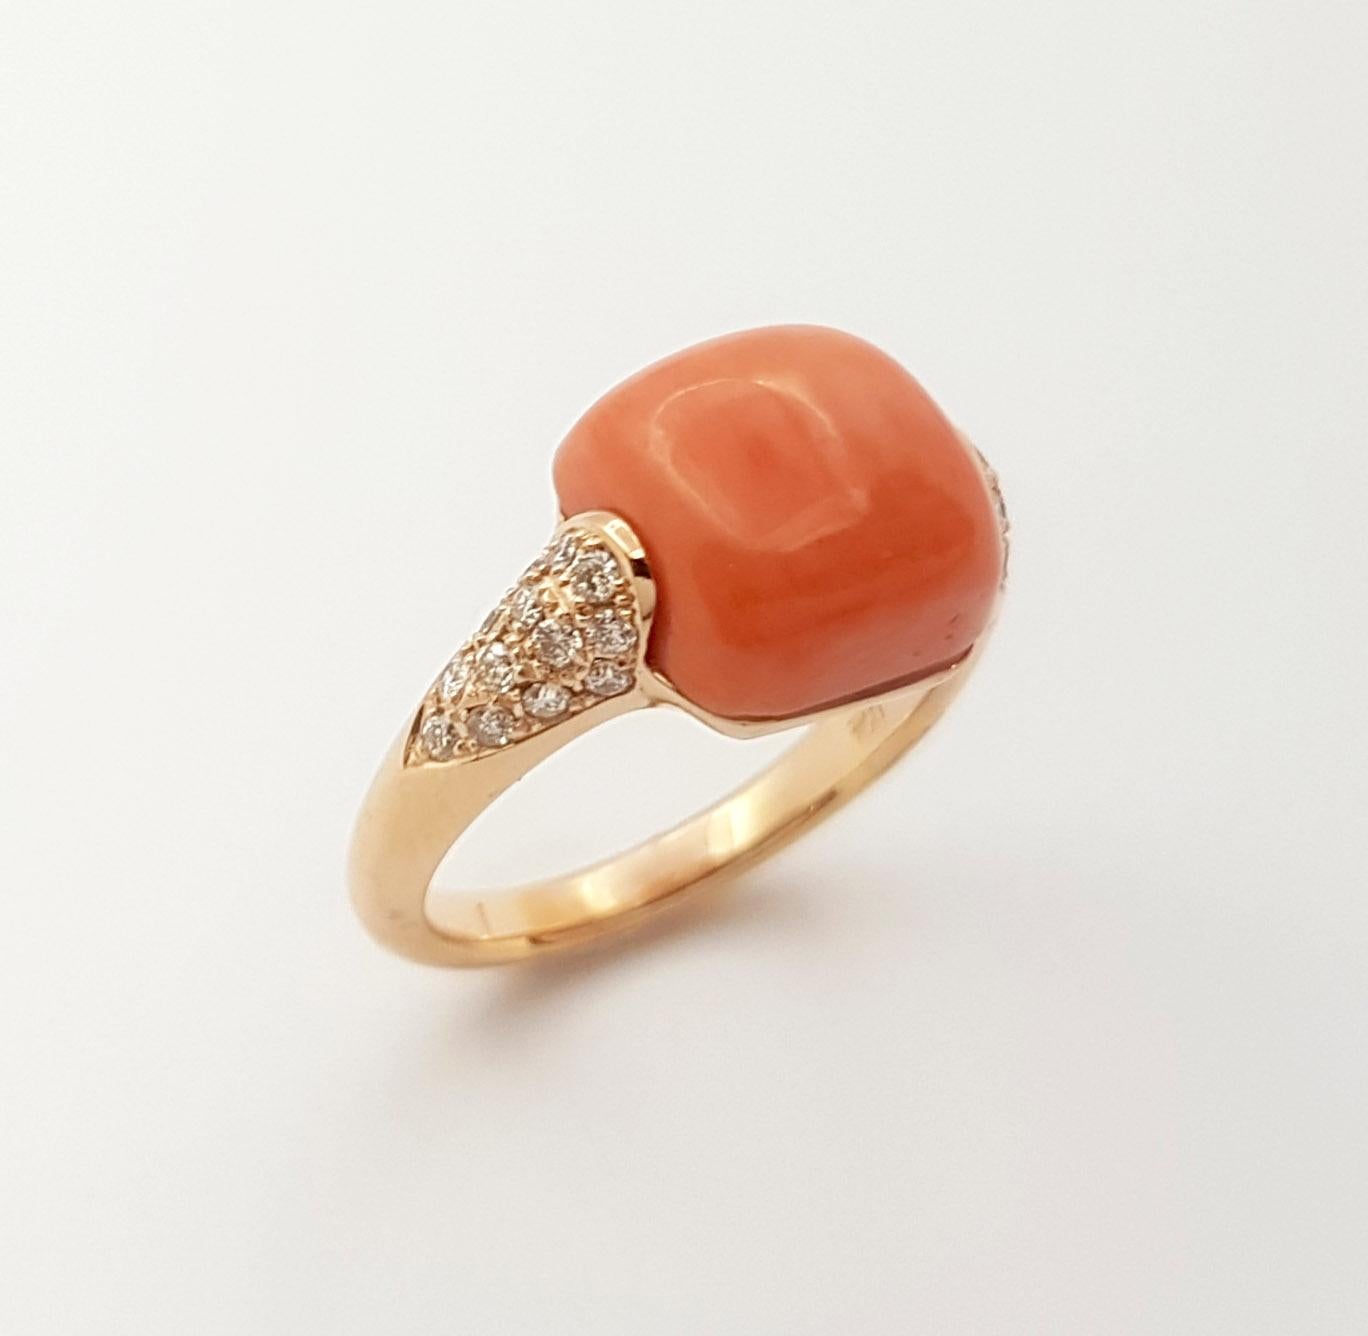 Coral with Brown Diamond 0.32 carat Ring set in 18 Karat Rose Gold Settings

Width:  1.0 cm 
Length: 1.0 cm
Ring Size: 54
Total Weight: 6.66 grams

